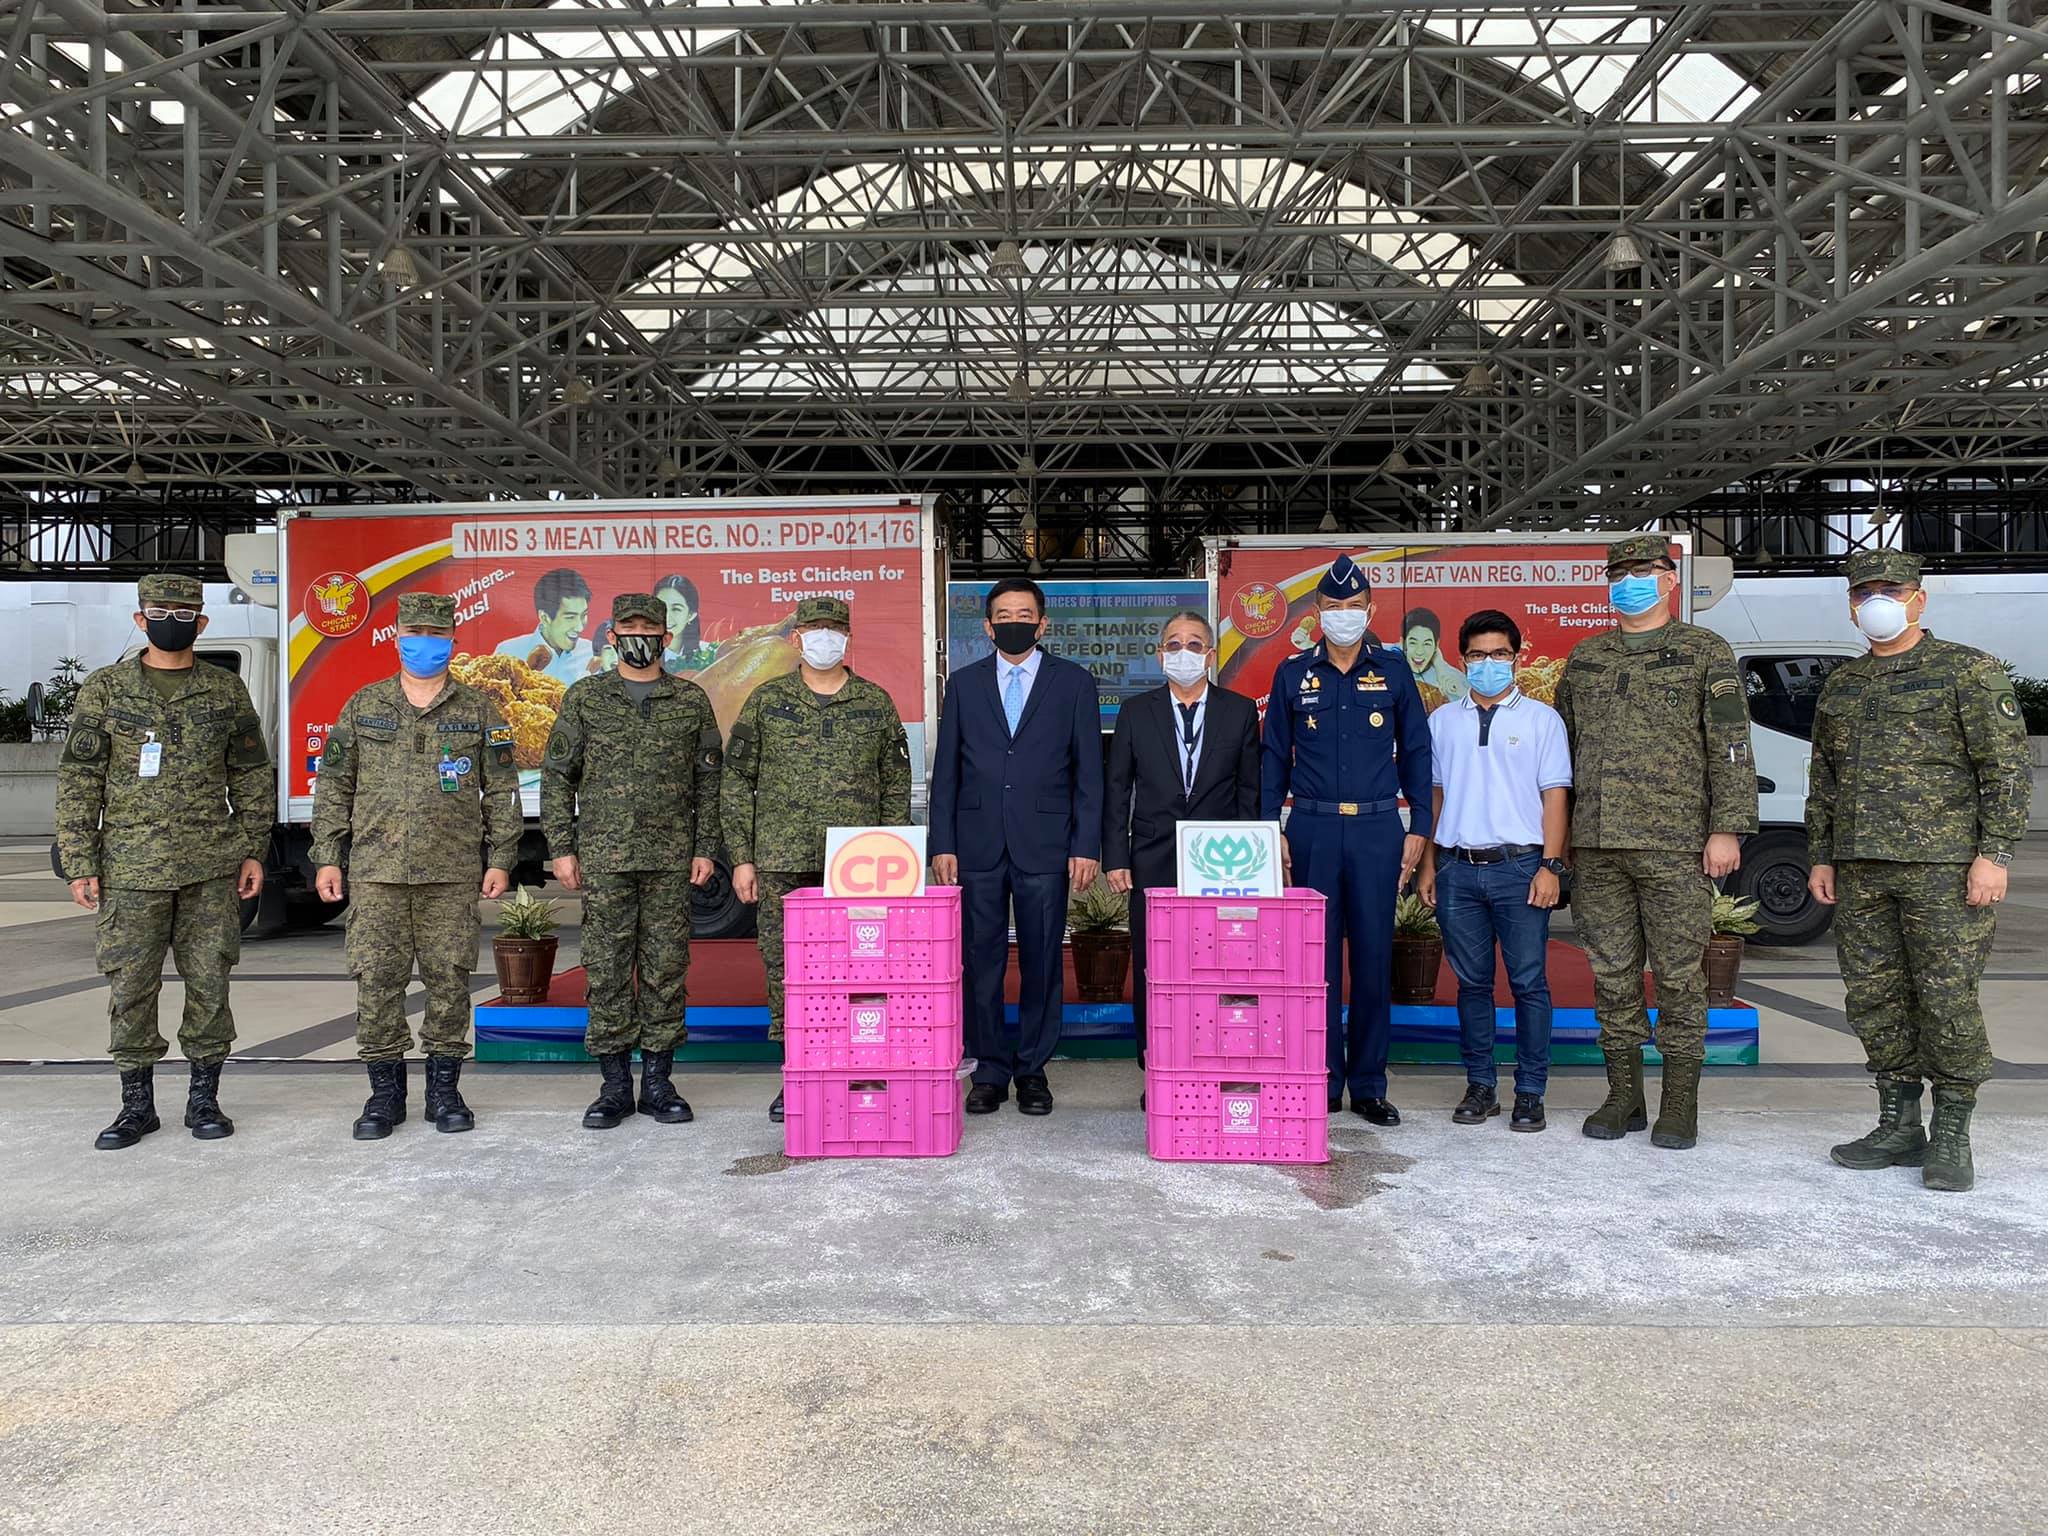 The Armed Forces of the Philippines received 5,000 dressed chicken from CPF Philippines through the Embassy of Thailand in Manila